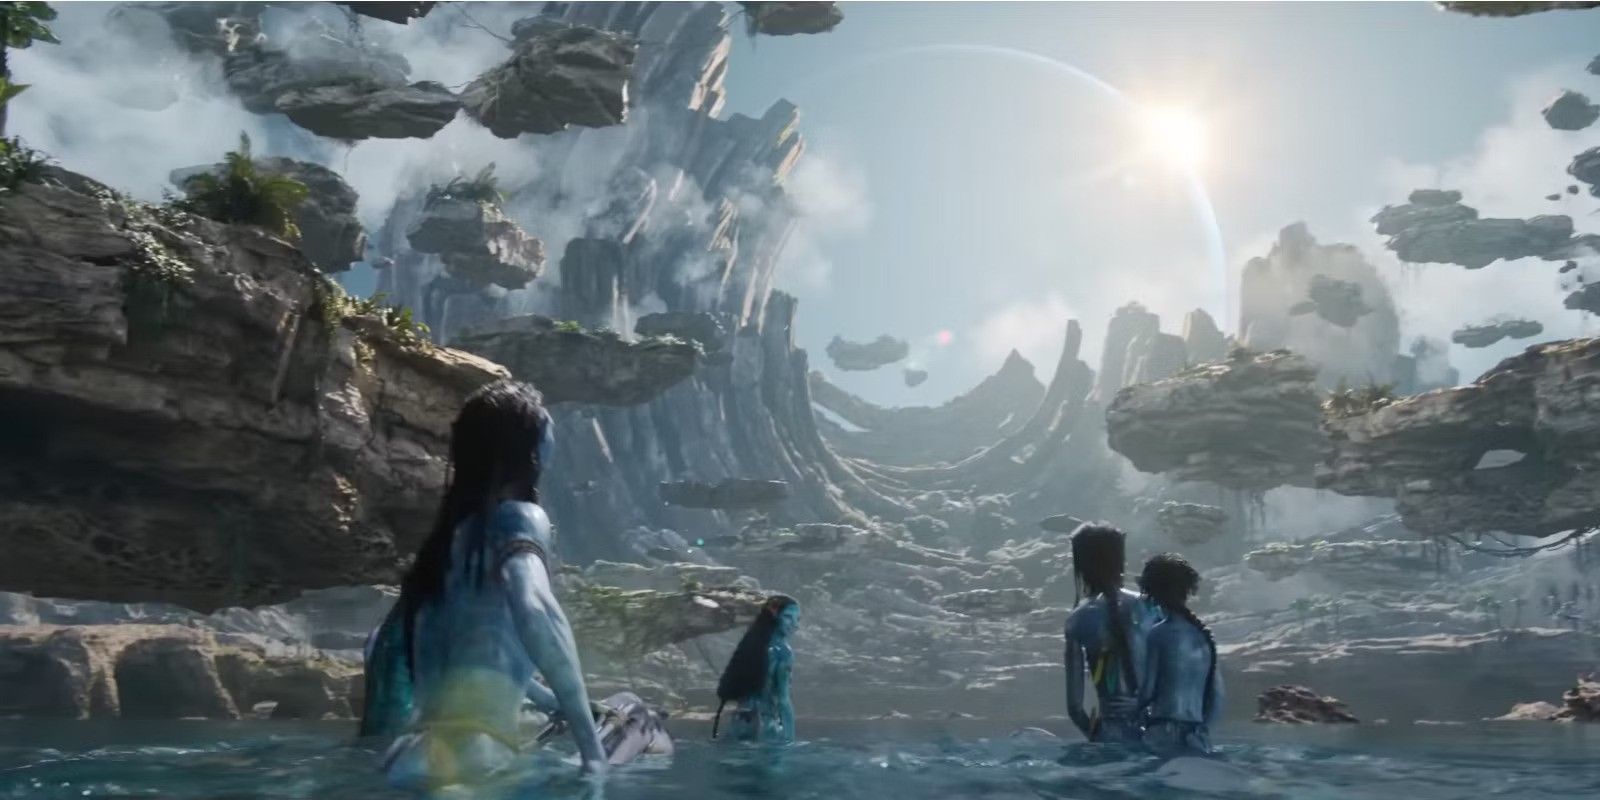 Avatar: The Way of Water relies heavily on VFX for its story-telling.